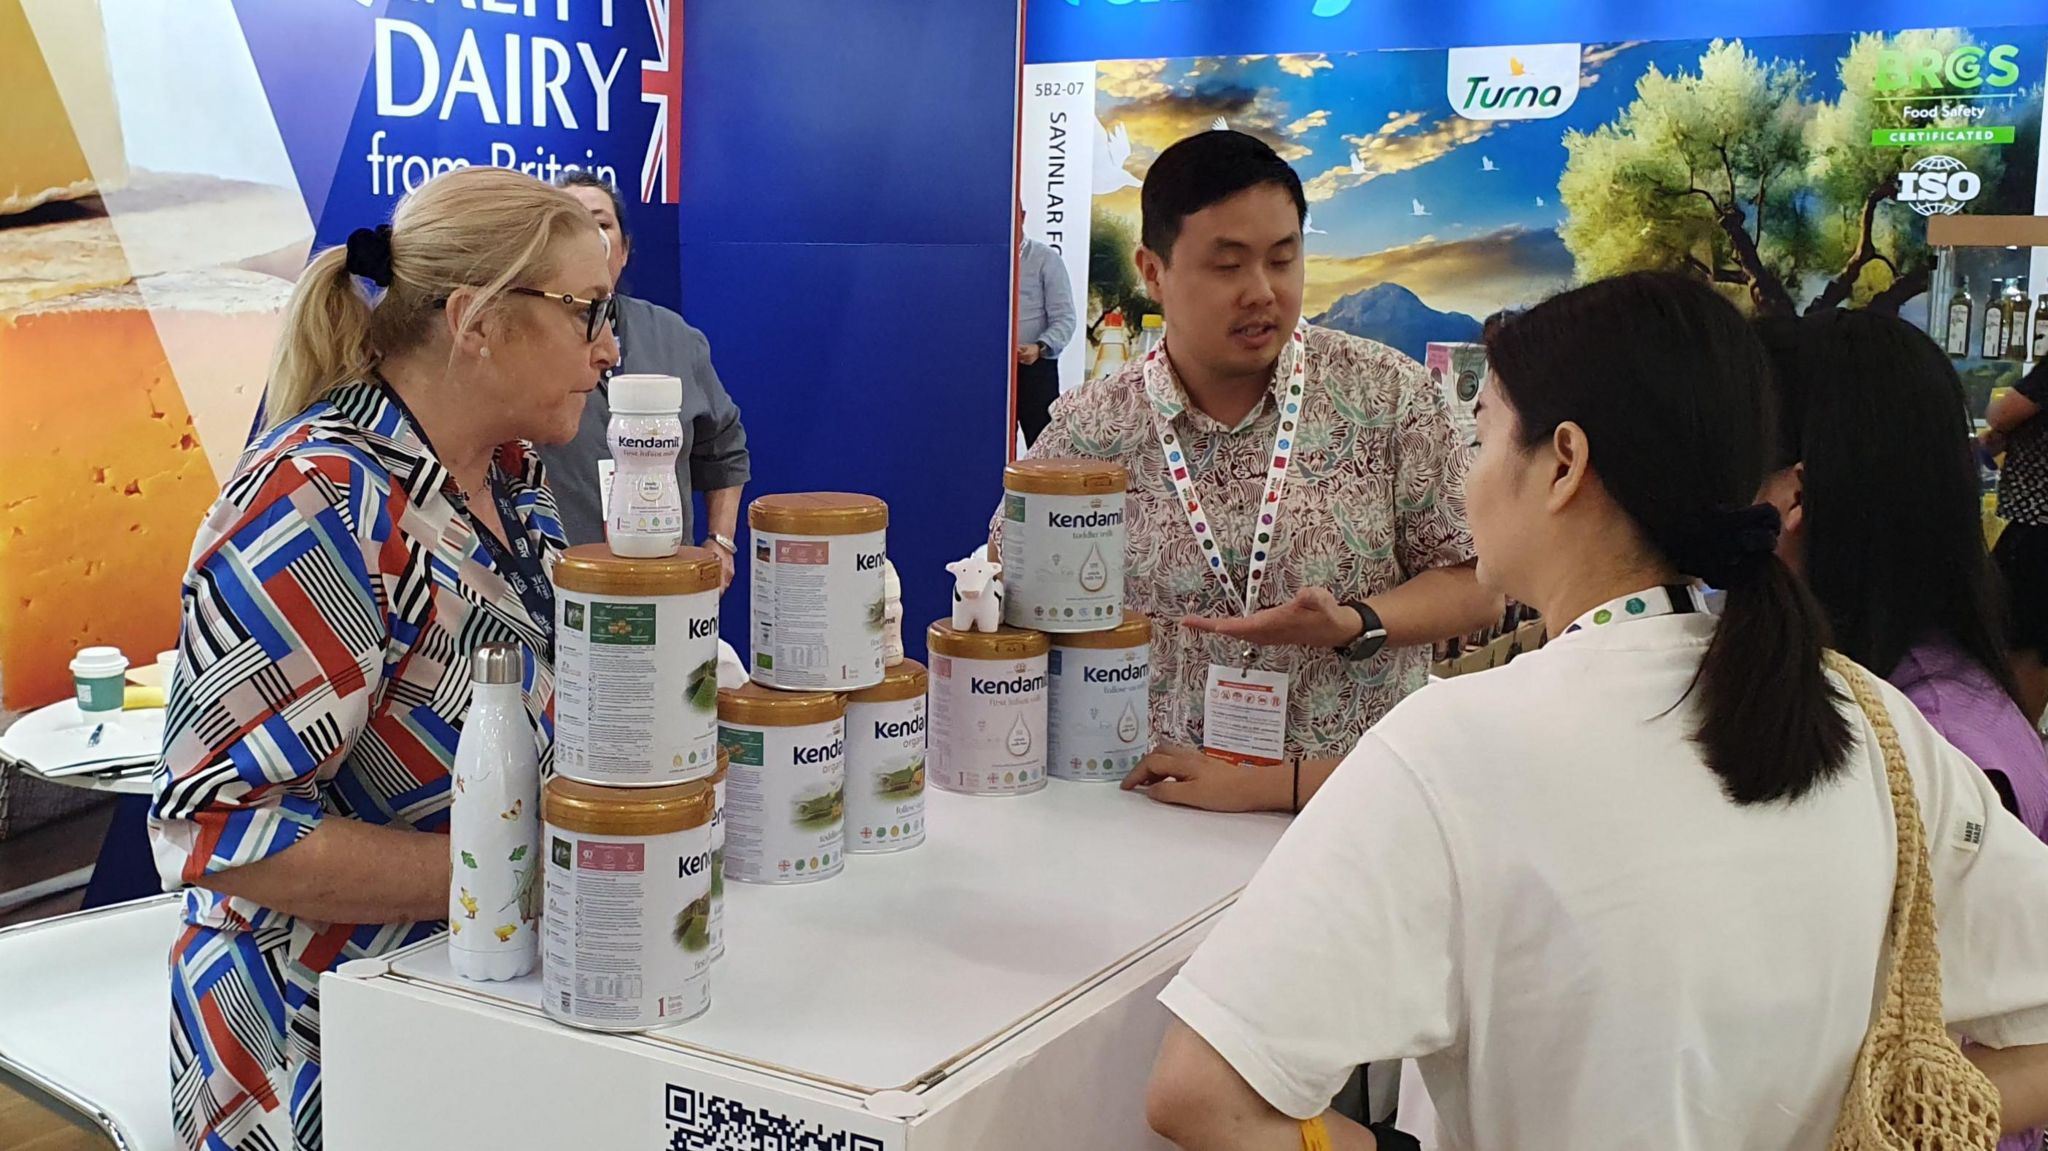 A British exhibit at a food show in Singapore